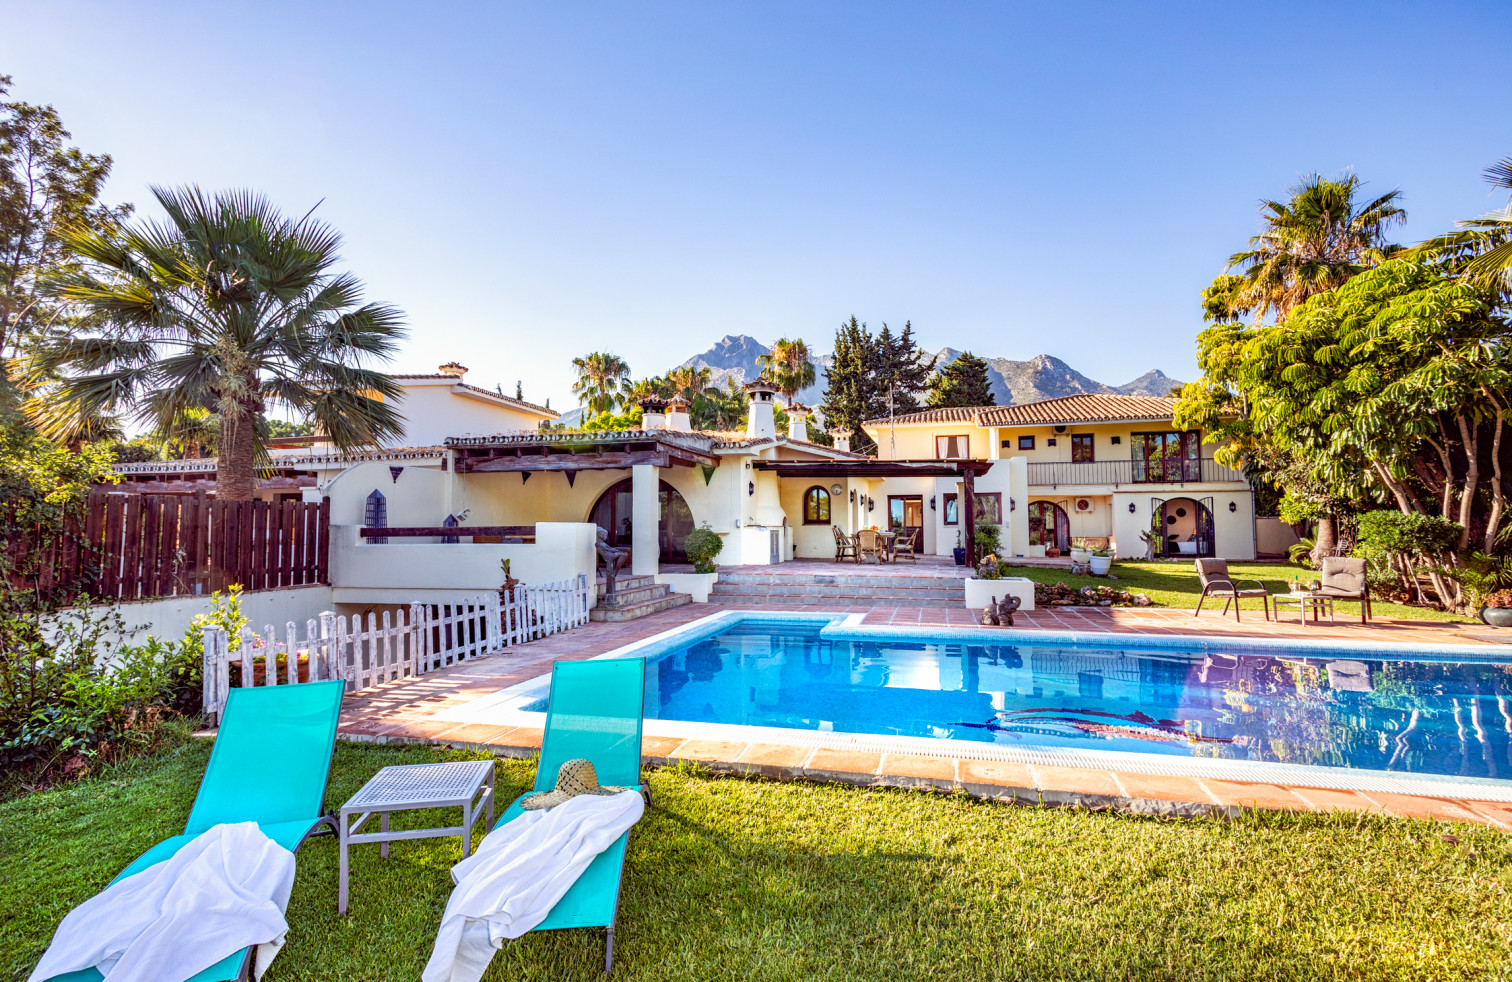 2 VILLAS IN NAGUELES FOR THE PRICE OF 1 !!!!